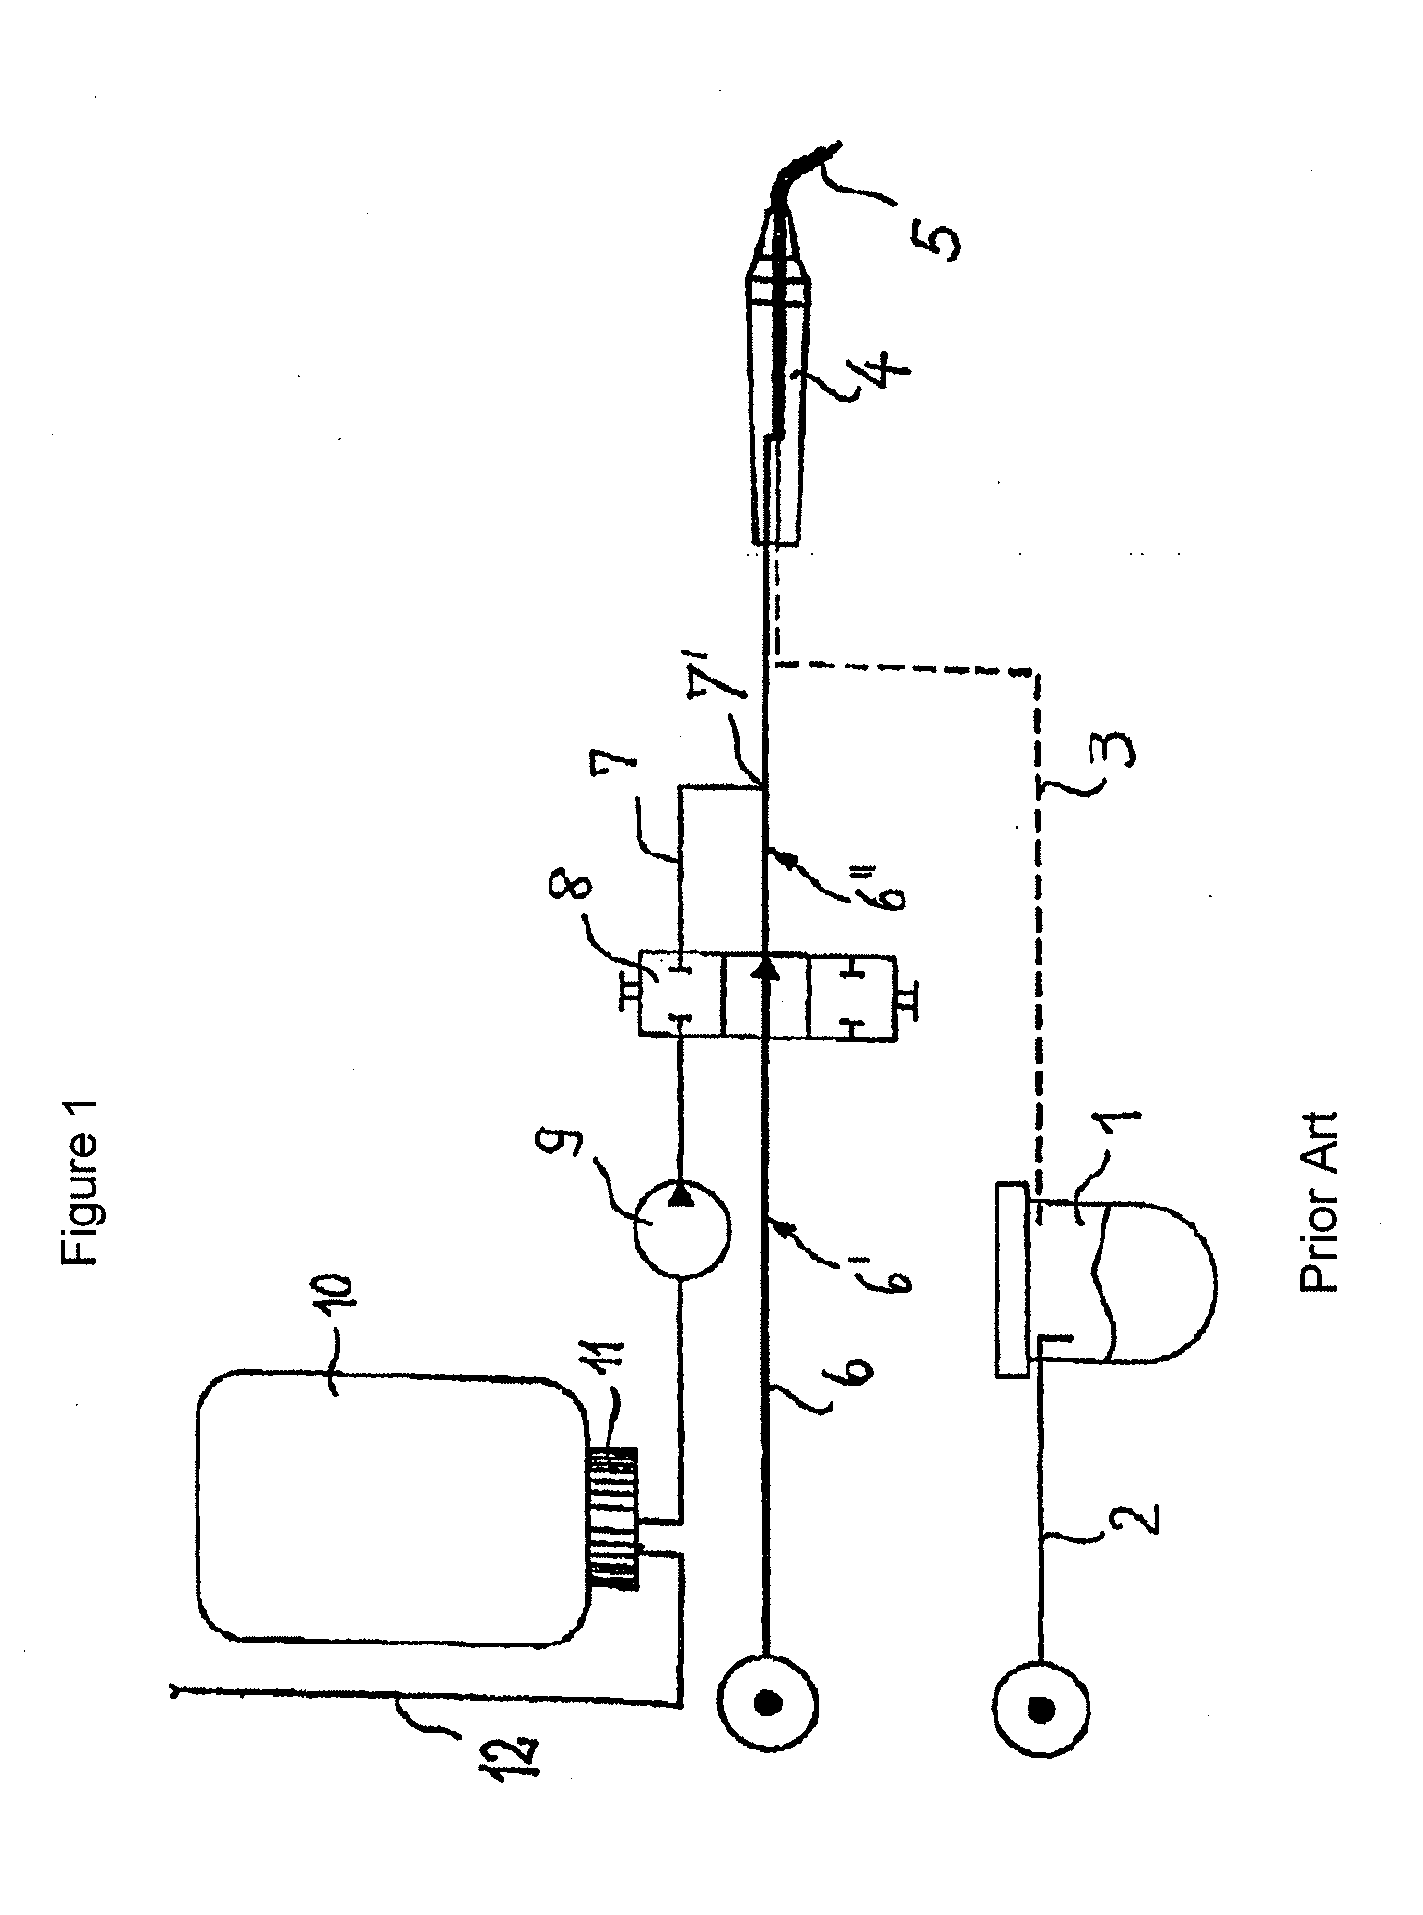 Method Of Powder Blasting For Cleaning Of Tooth Surfaces